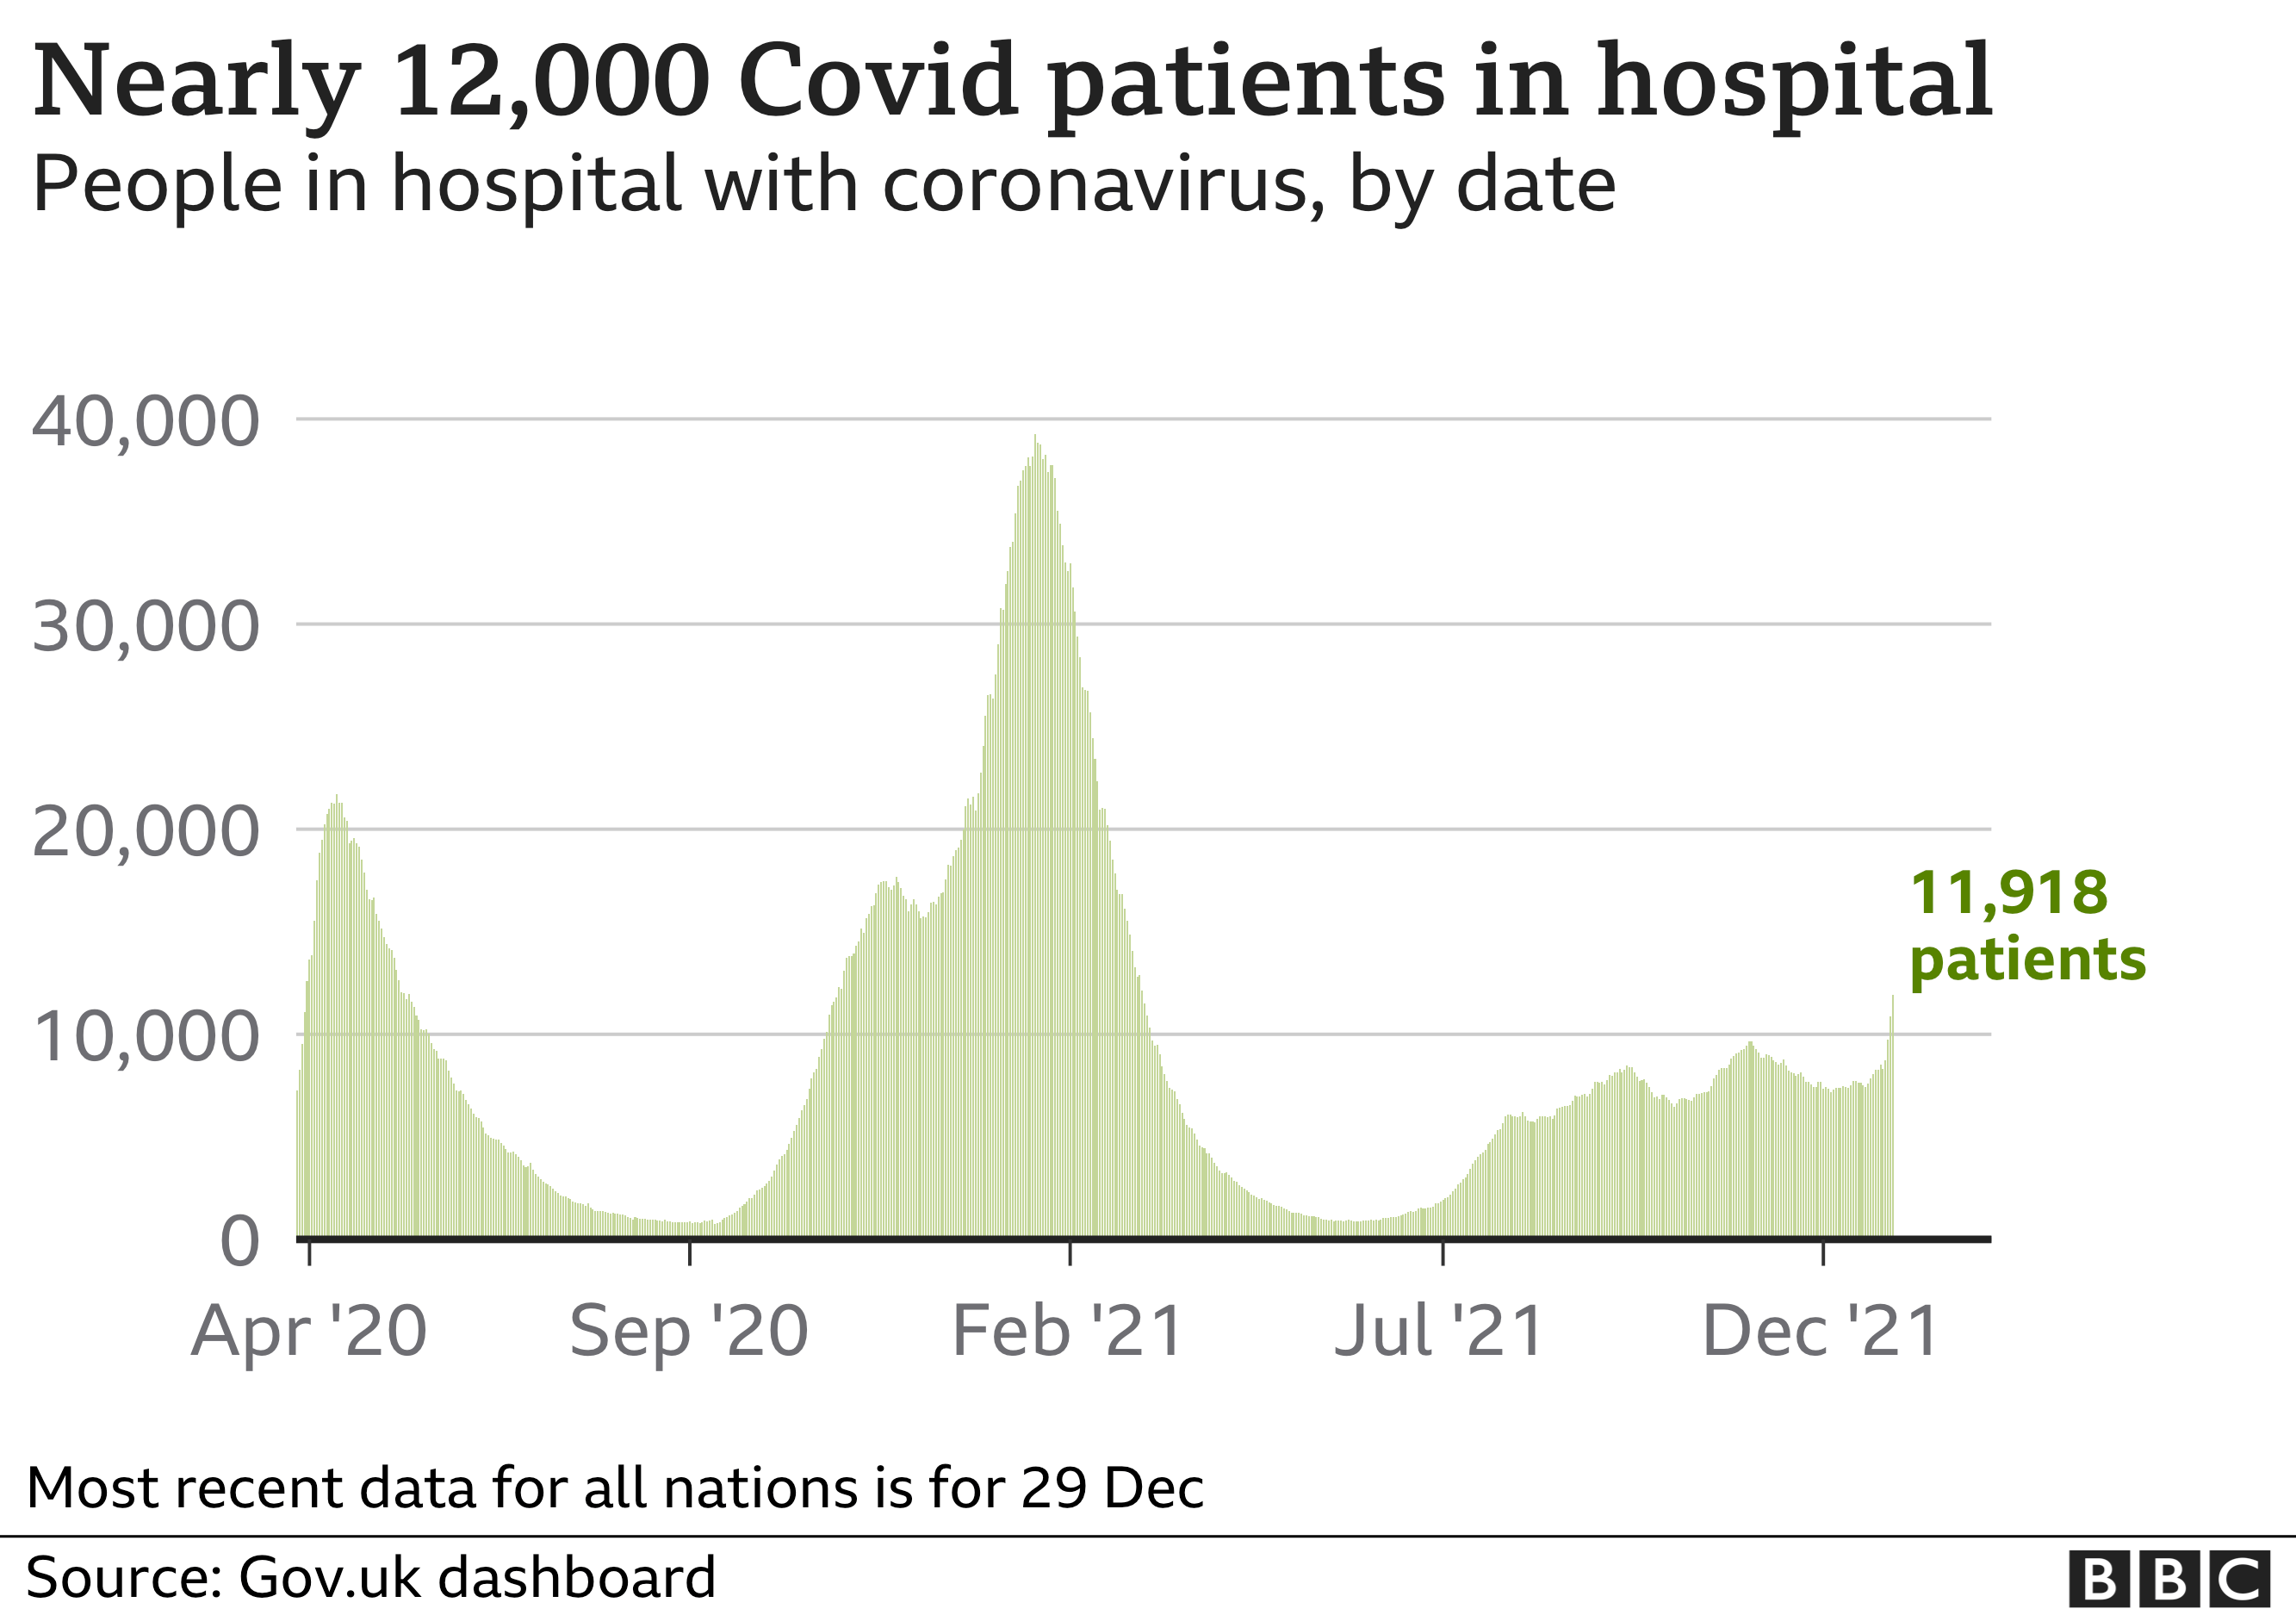 Chart showing the number of patients in hospital in the UK